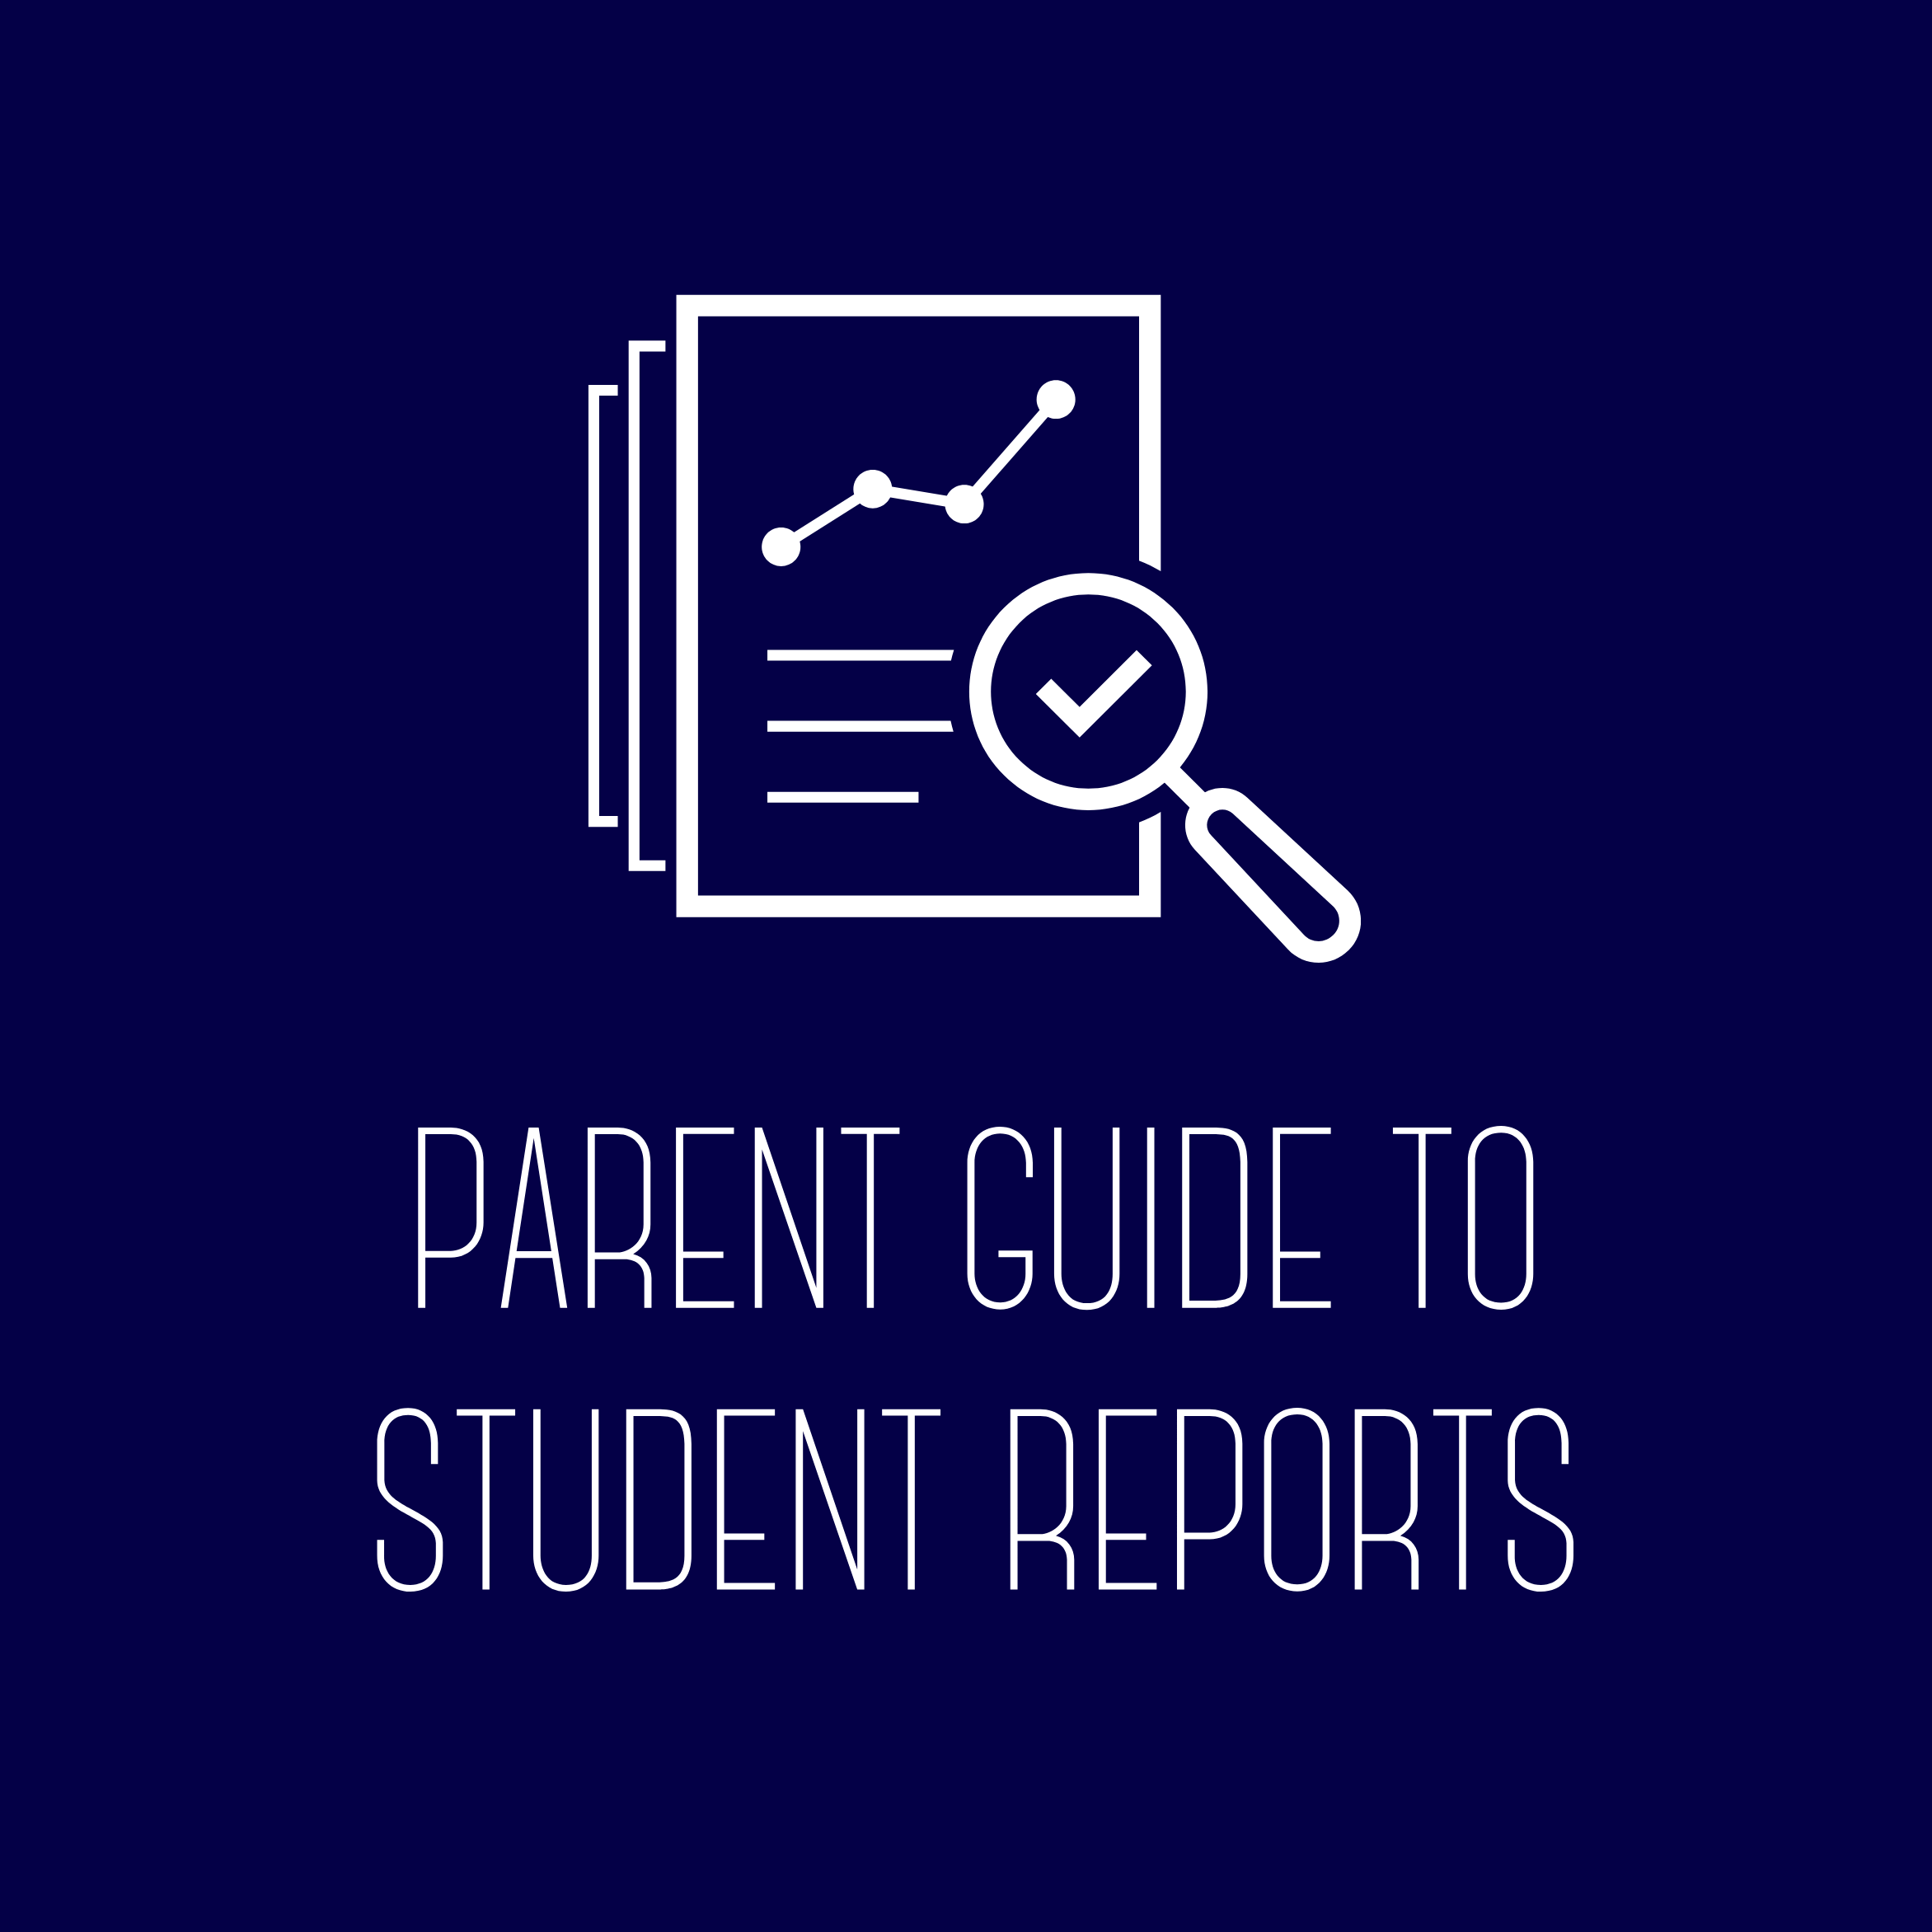 Parent Guide to Student Reports